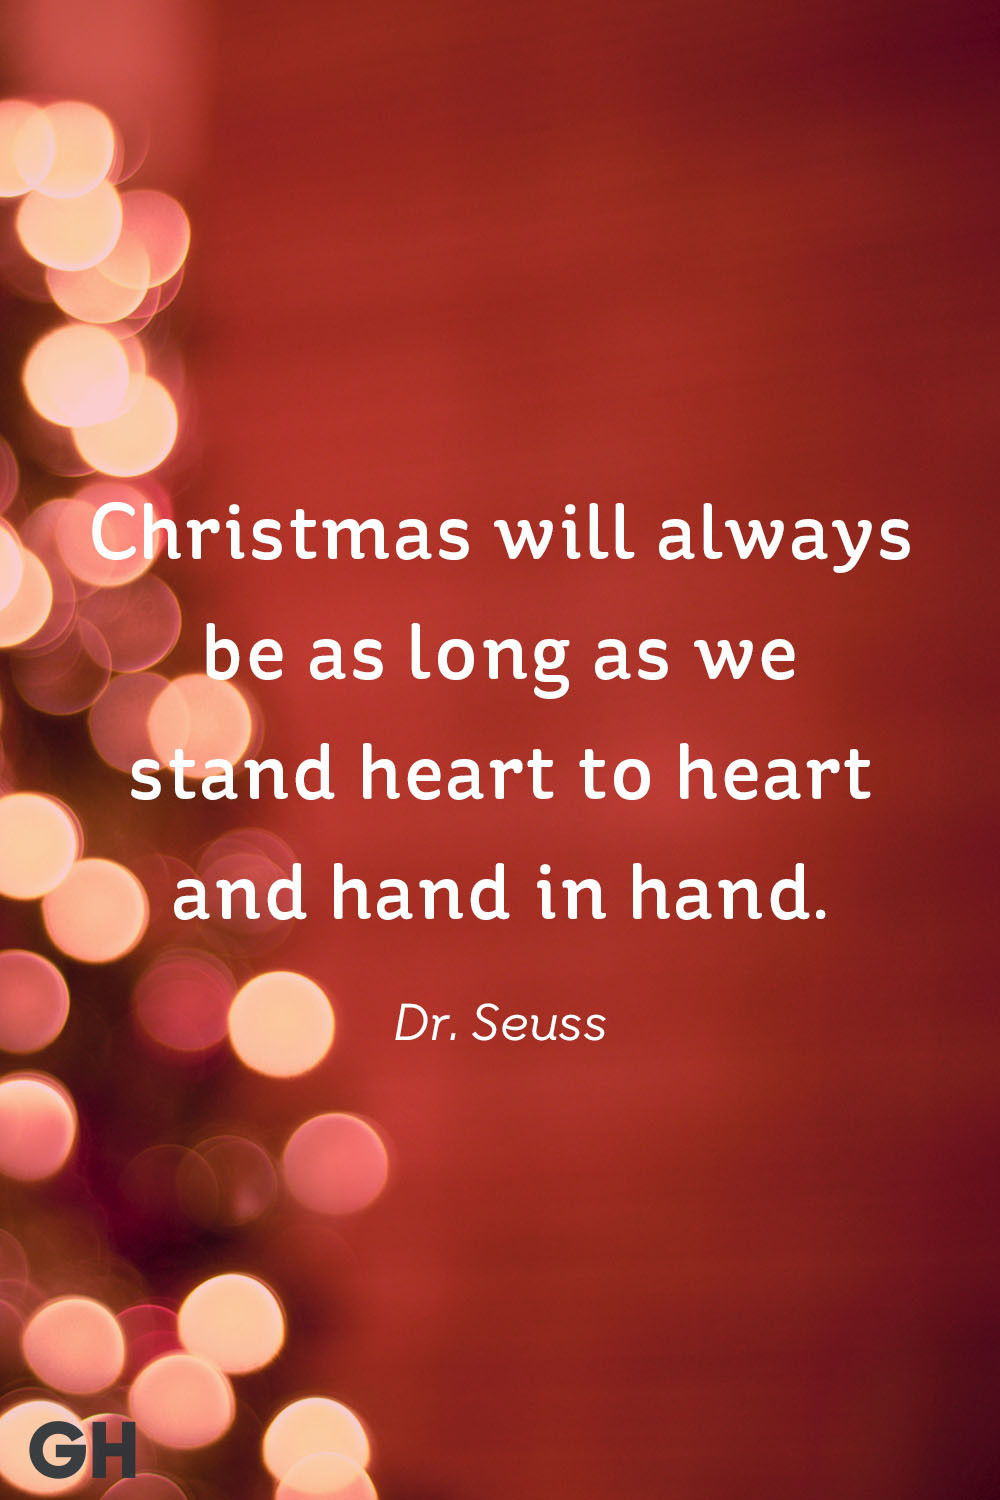 Quotes Christmas
 27 Best Christmas Quotes of All Time Festive Holiday Sayings